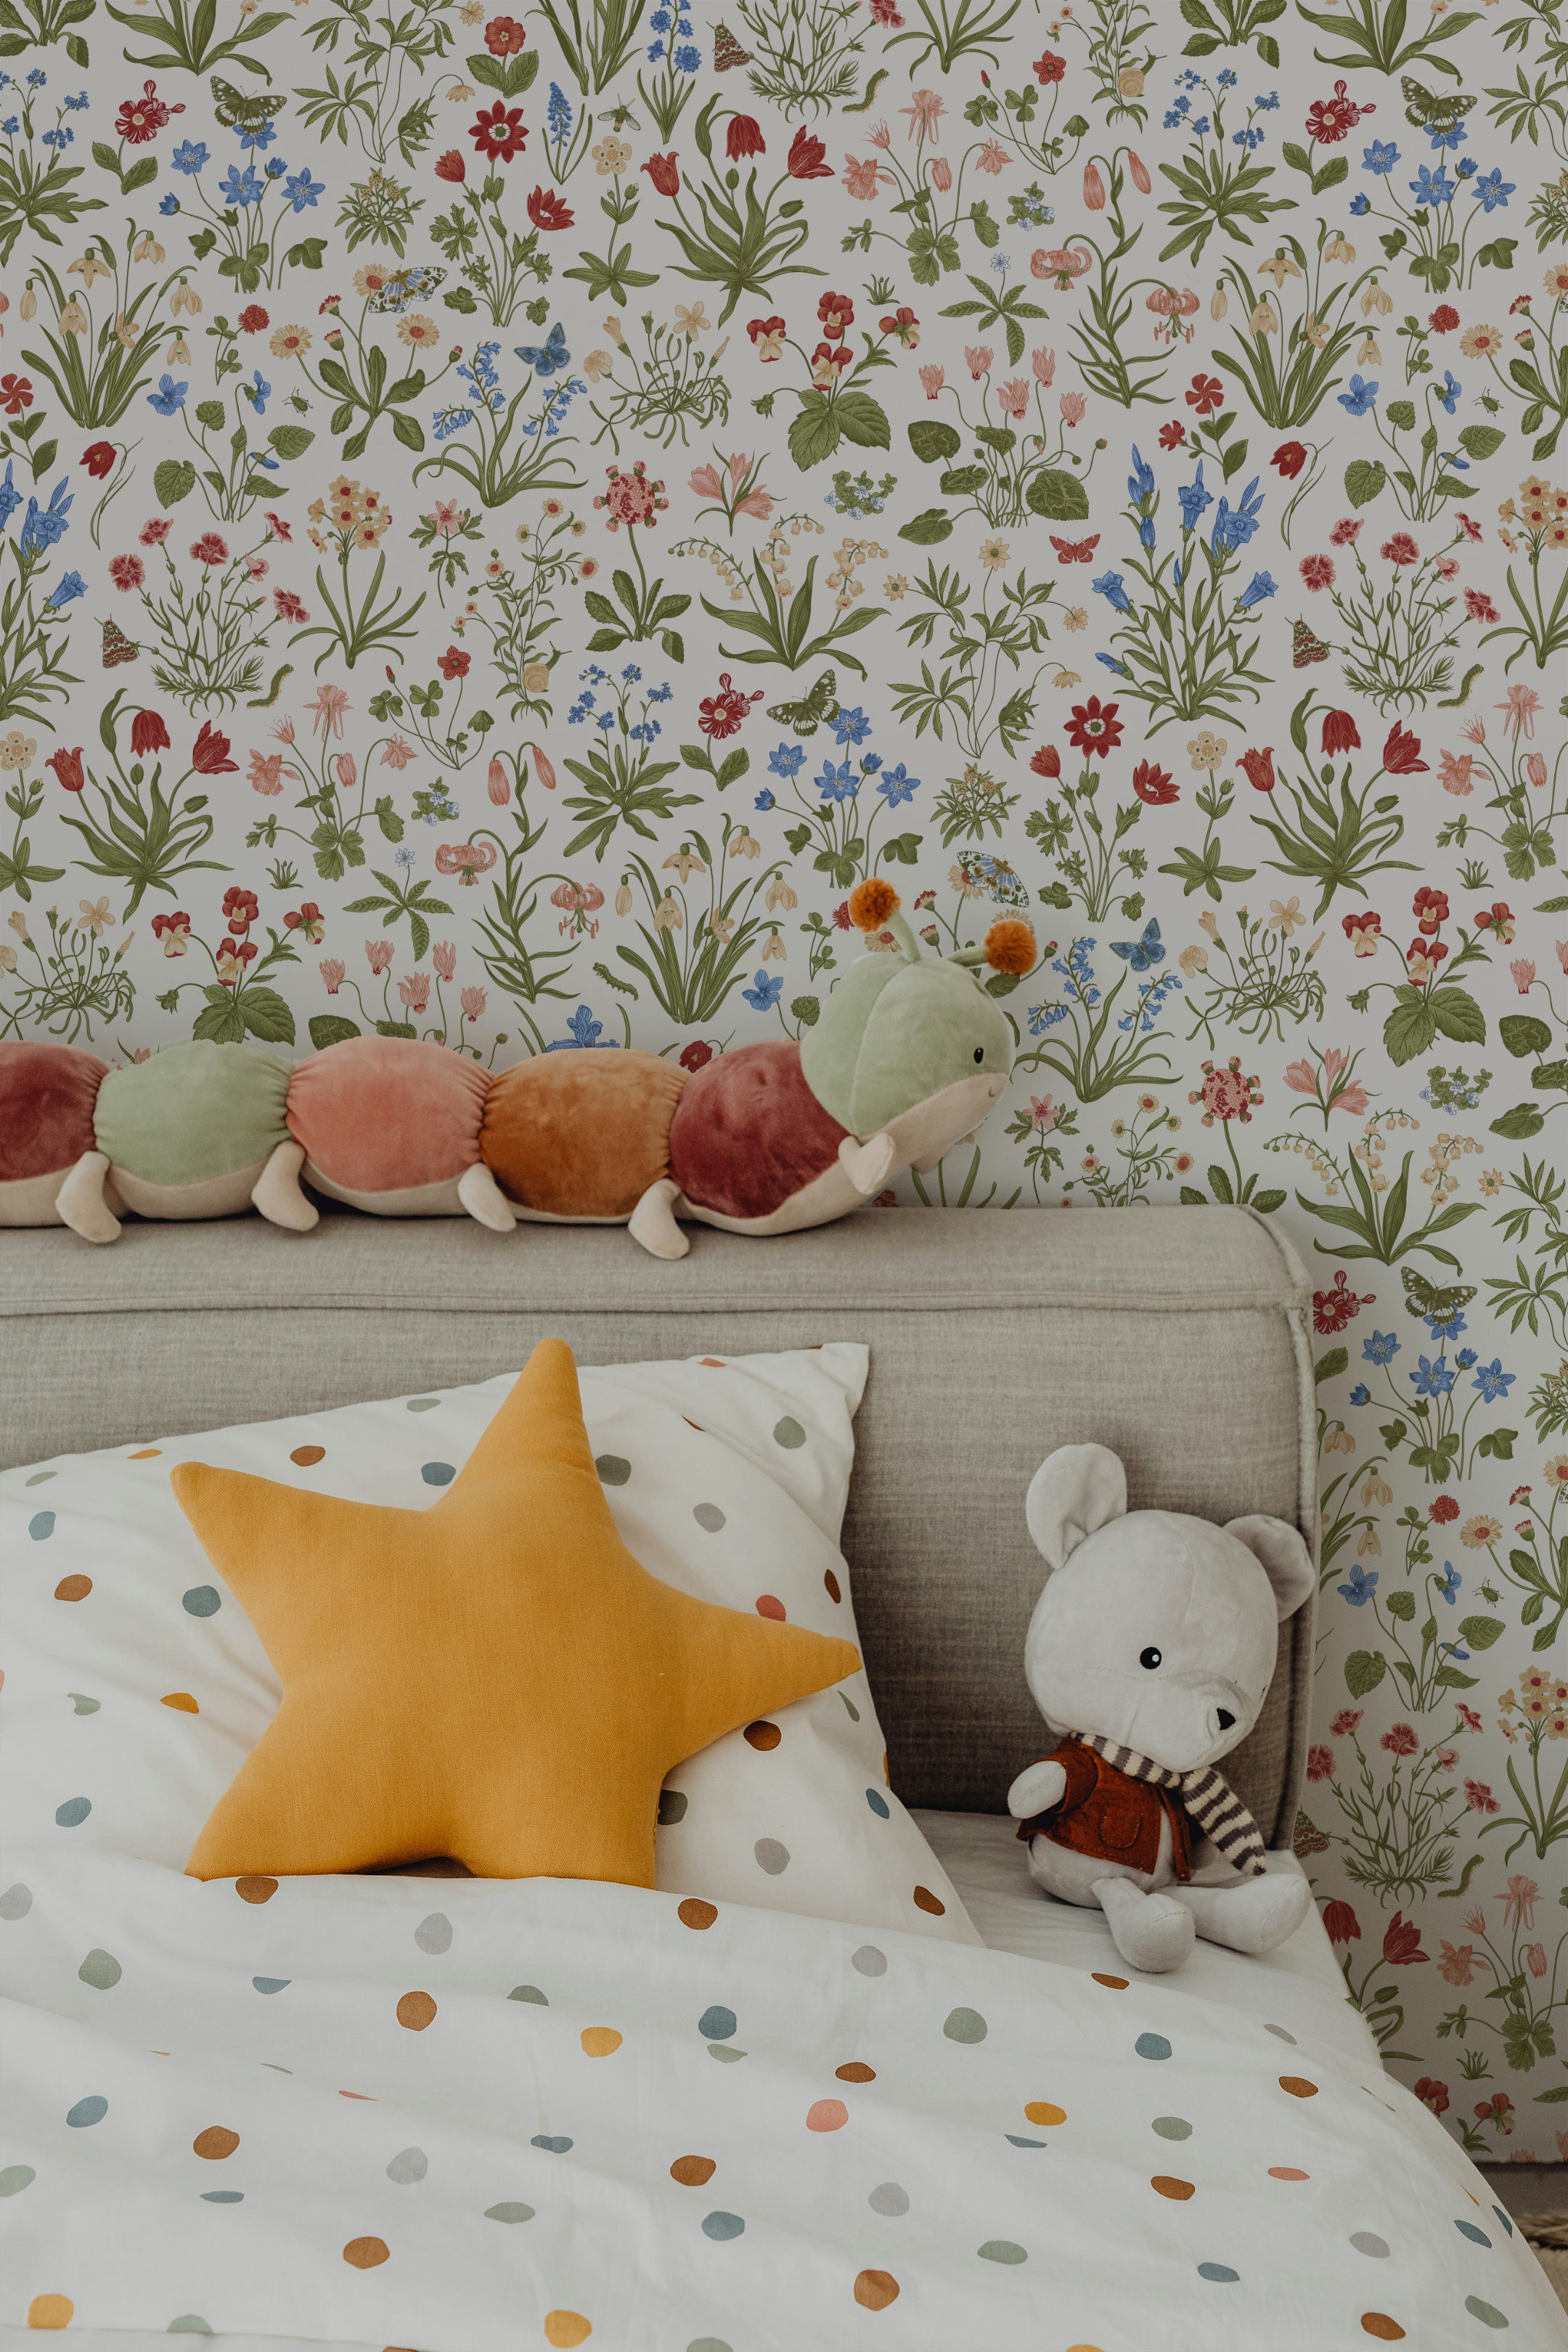 Nursery room featuring 'Garden Fantasy Wallpaper' with a diverse array of hand-drawn wildflowers in vibrant colors on a cream background, adding a joyful and colorful ambiance. A colorful caterpillar plush toy sits atop the bed, complementing the playful and nature-inspired theme of the room.